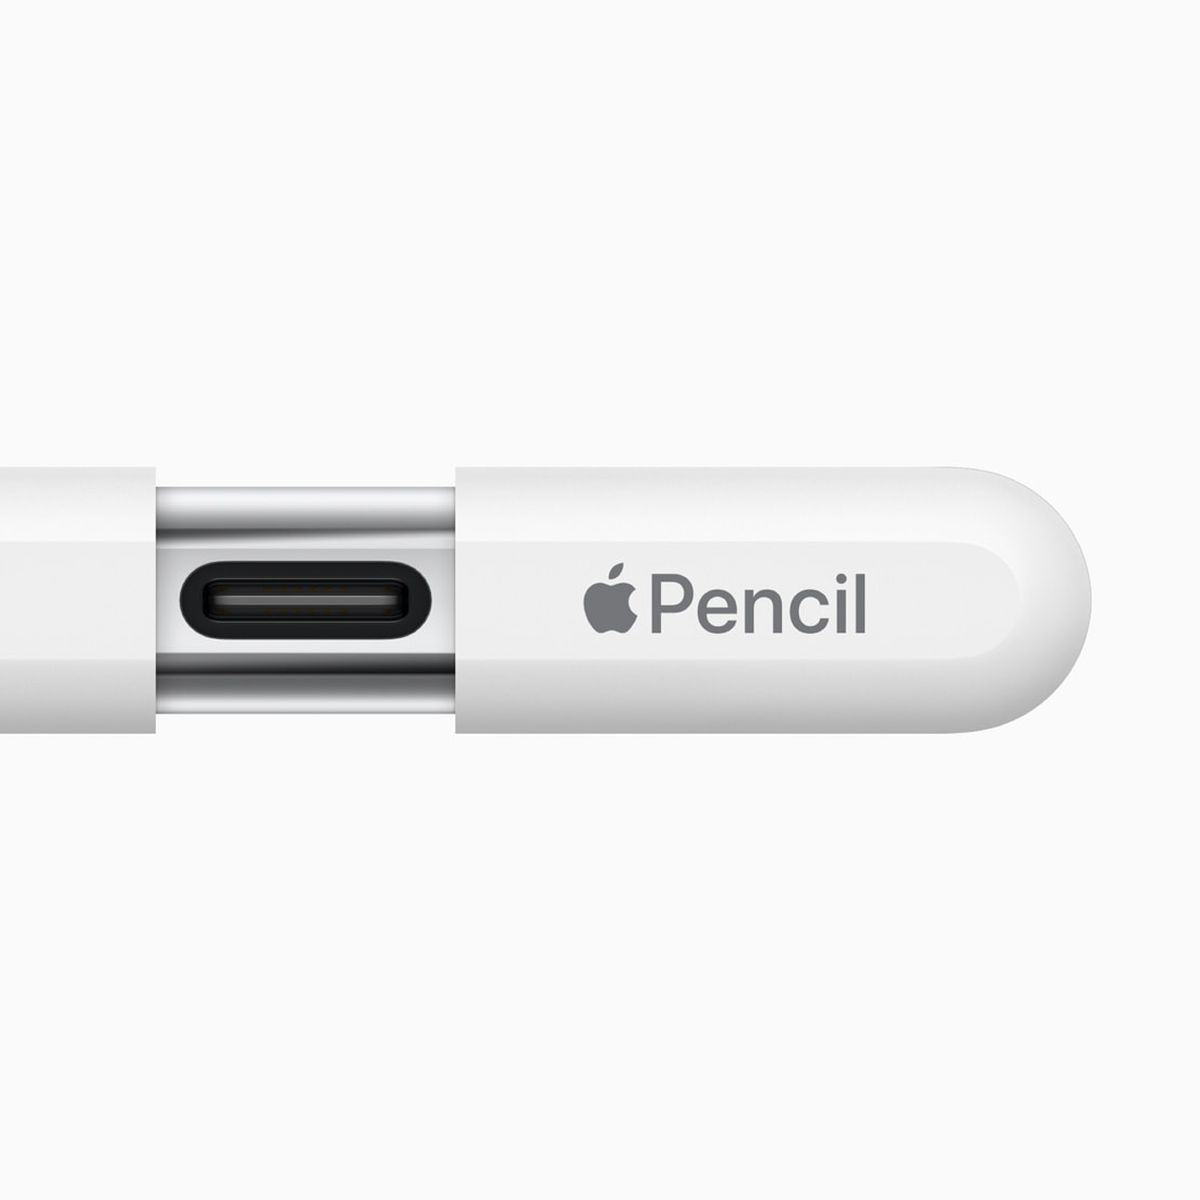 8 Things to Know About the New Apple Pencil - MacRumors